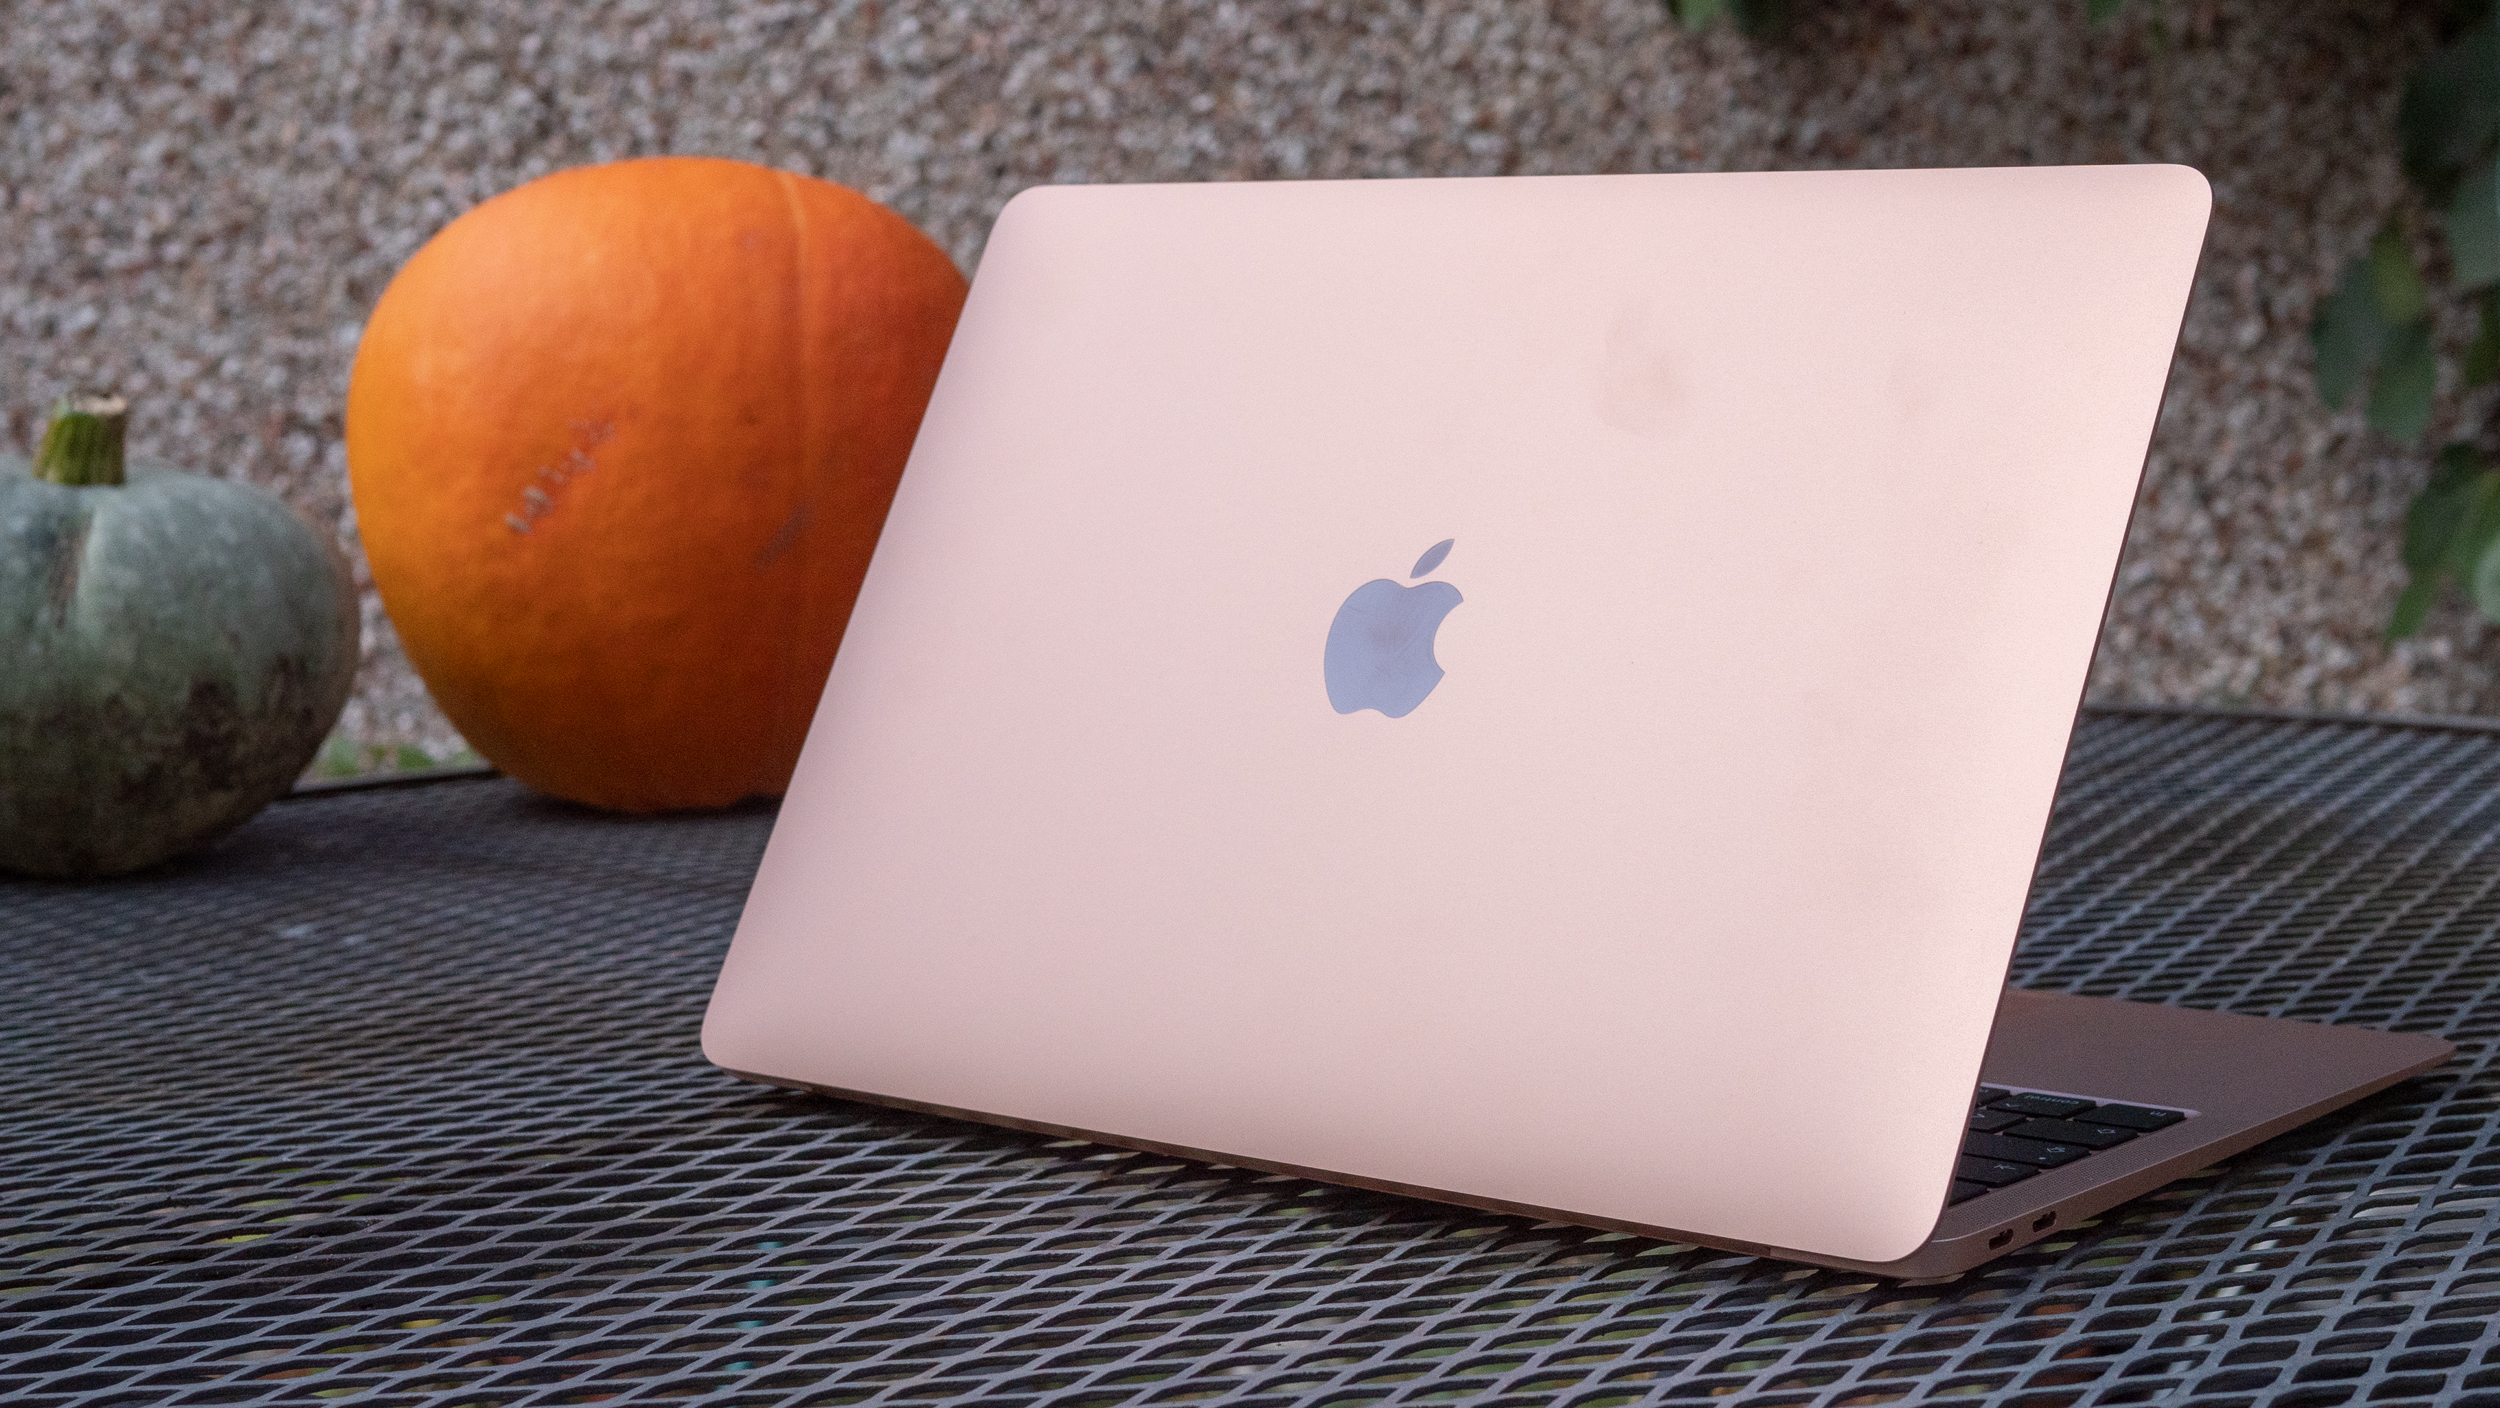 Apple MacBook Air 2020 review 05 - Apple MacBook Air (late 2020) with M1 Chip is super fast